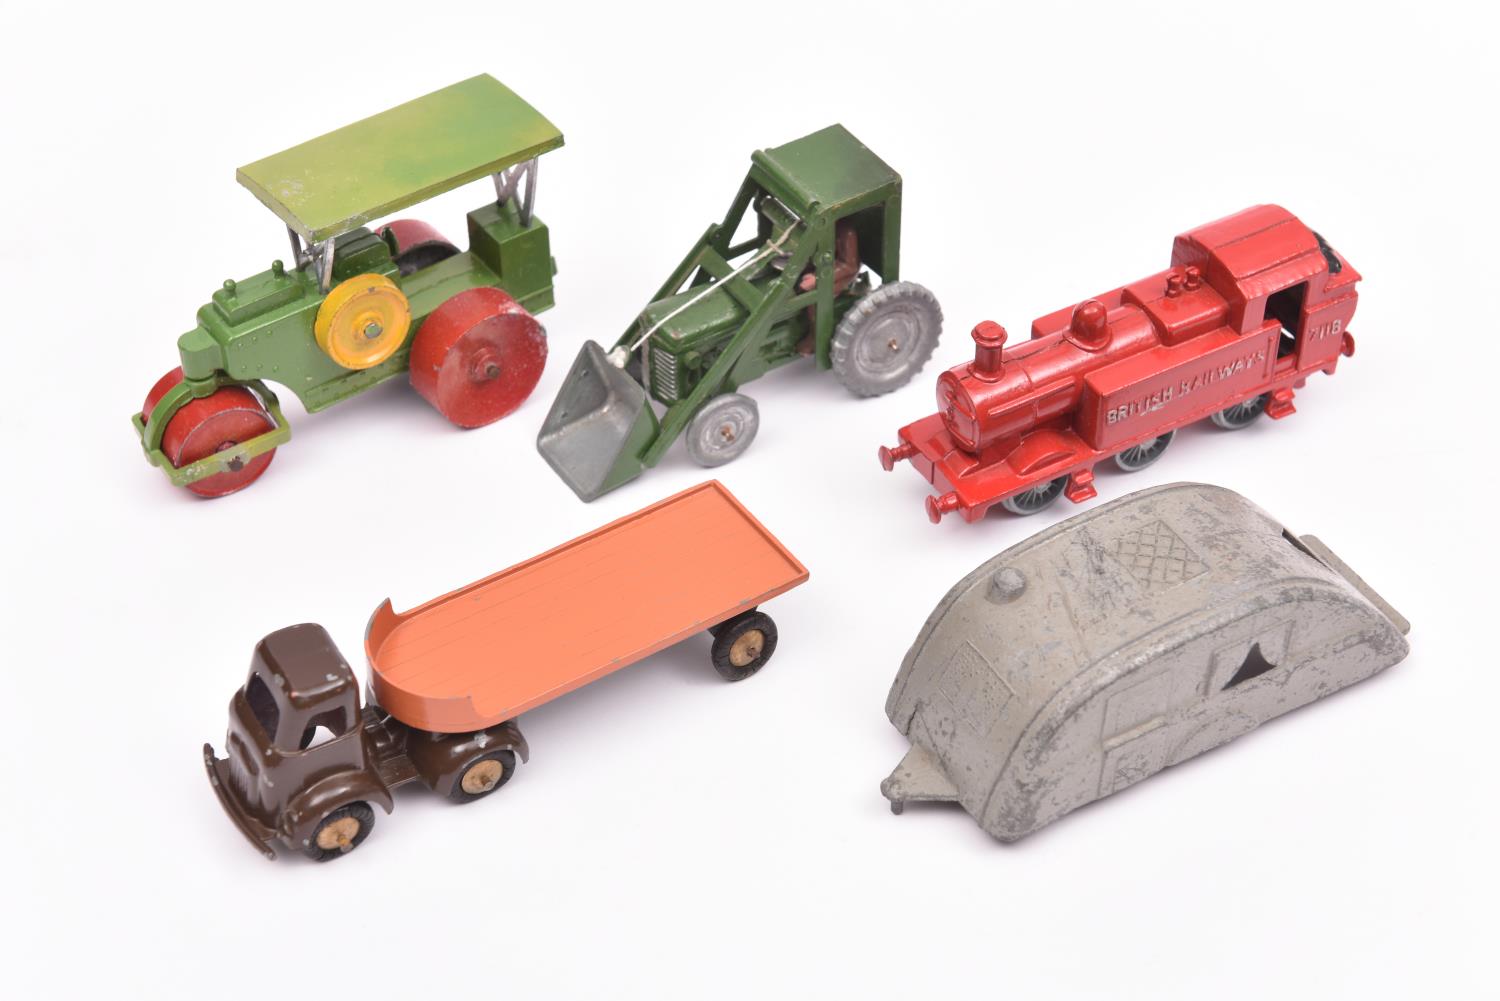 5 item by Benbros etc. A Benbros Tractor with cab, and shovel. In green with unpainted wheels and - Image 2 of 2